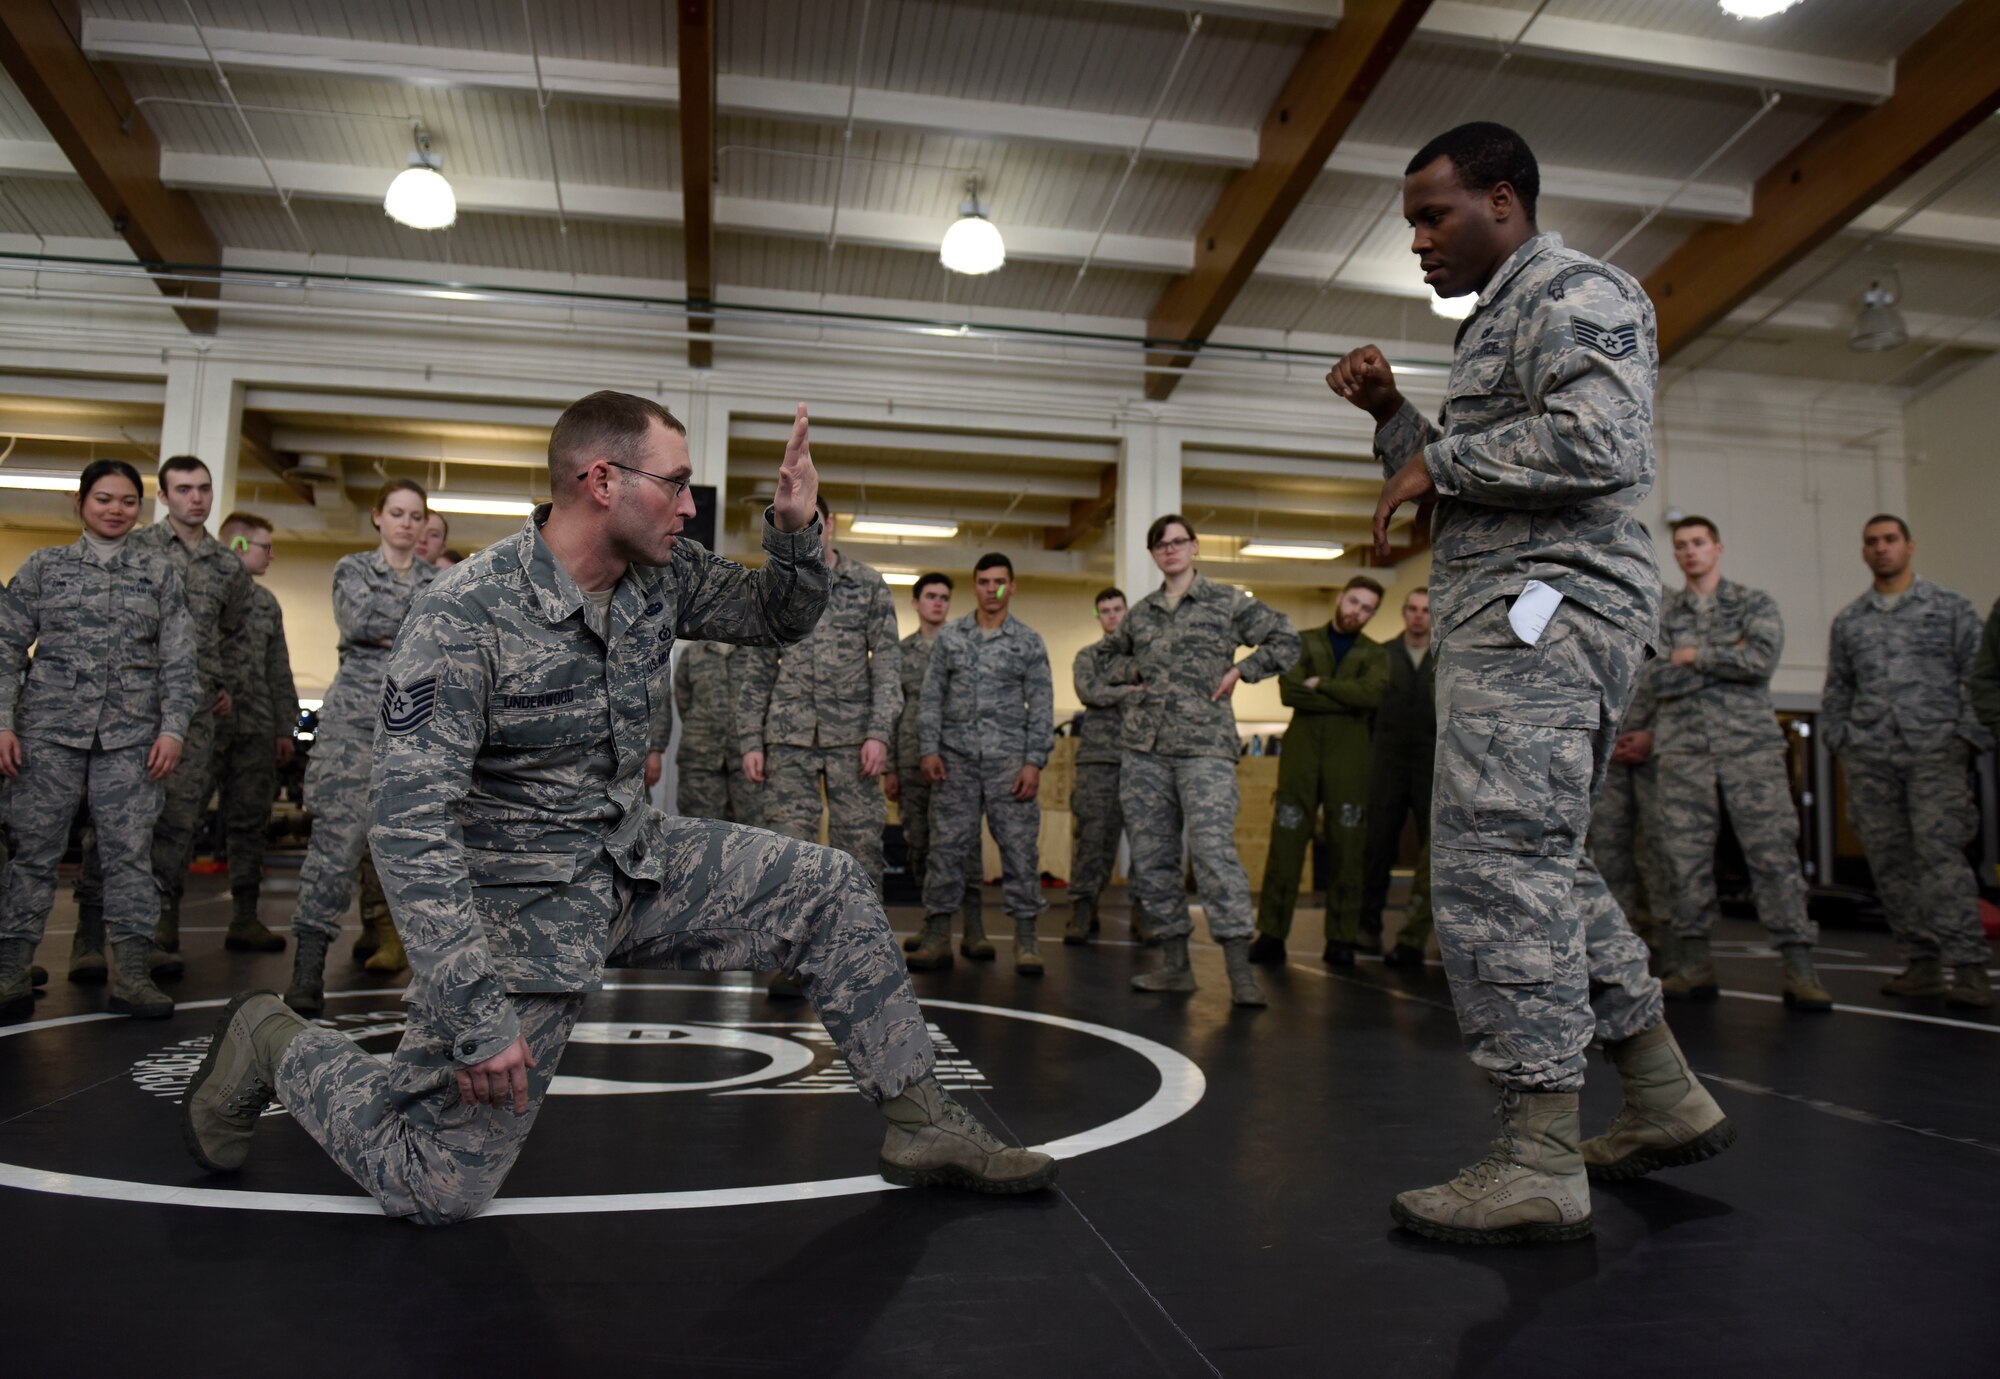 U.S. Air Force Tech. Sgt. Jarad Underwood, 22nd Training Squadron Advanced Skills Training NCO in charge, and Staff Sgt. Corray Valentine, 22nd TRS AST instructor, demonstrate a “shield block” during a combat survival training for aircrew and battlefield Airmen at Fairchild Air Force Base, Washington, Jan. 31, 2019. Underwood is the first and only person in the Department of Defense who is eligible to teach combatives to members in all military branches. (U.S. Air Force photo/Senior Airman Jesenia Landaverde)